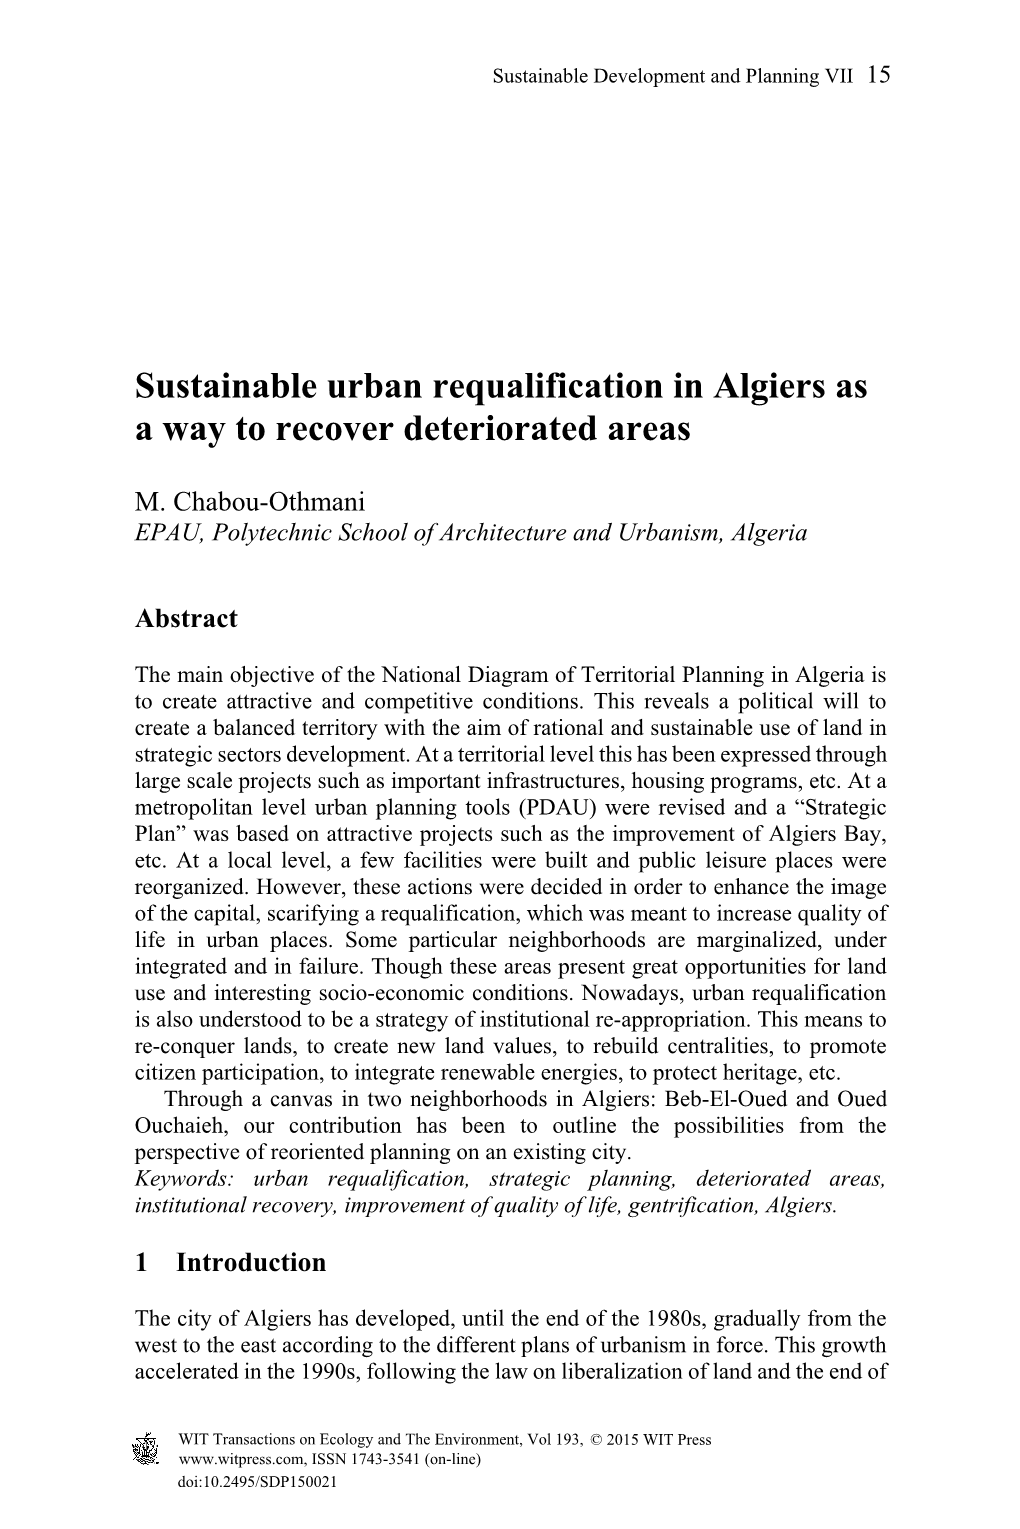 Sustainable Urban Requalification in Algiers As a Way to Recover Deteriorated Areas